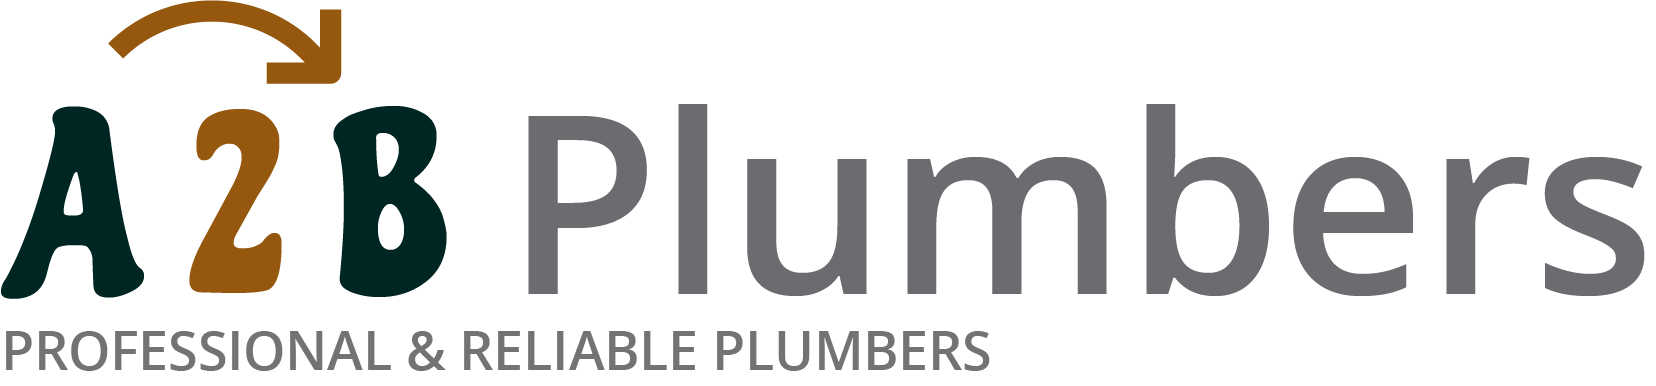 If you need a boiler installed, a radiator repaired or a leaking tap fixed, call us now - we provide services for properties in Motspur Park and the local area.